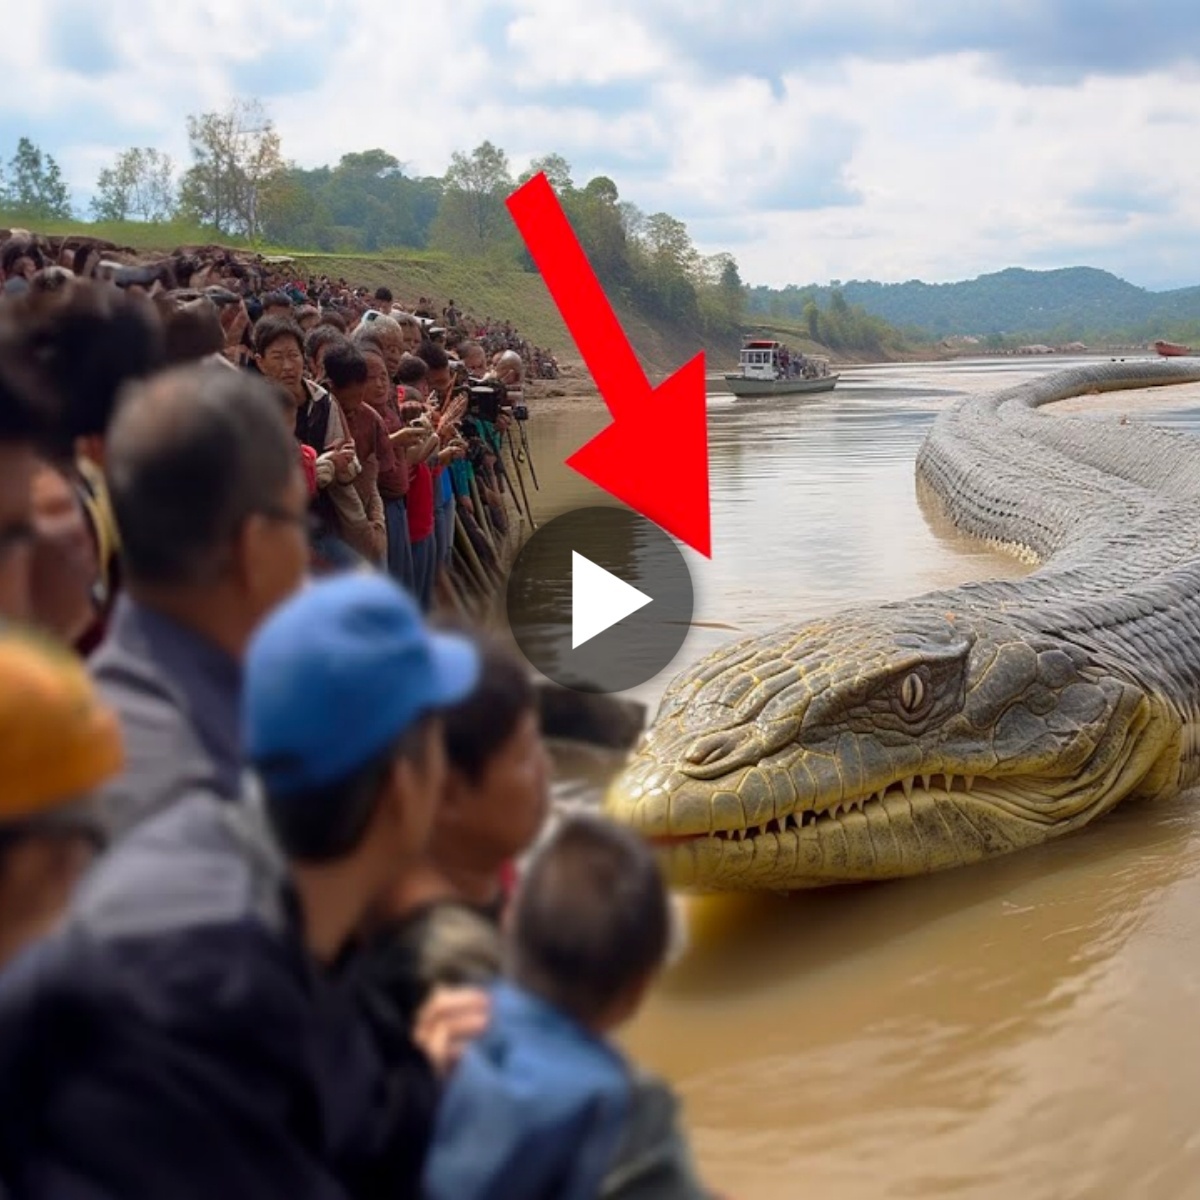 Appearing in the river, the giant dragon-headed snake caused chaos among the Dayak residents in Malaysia